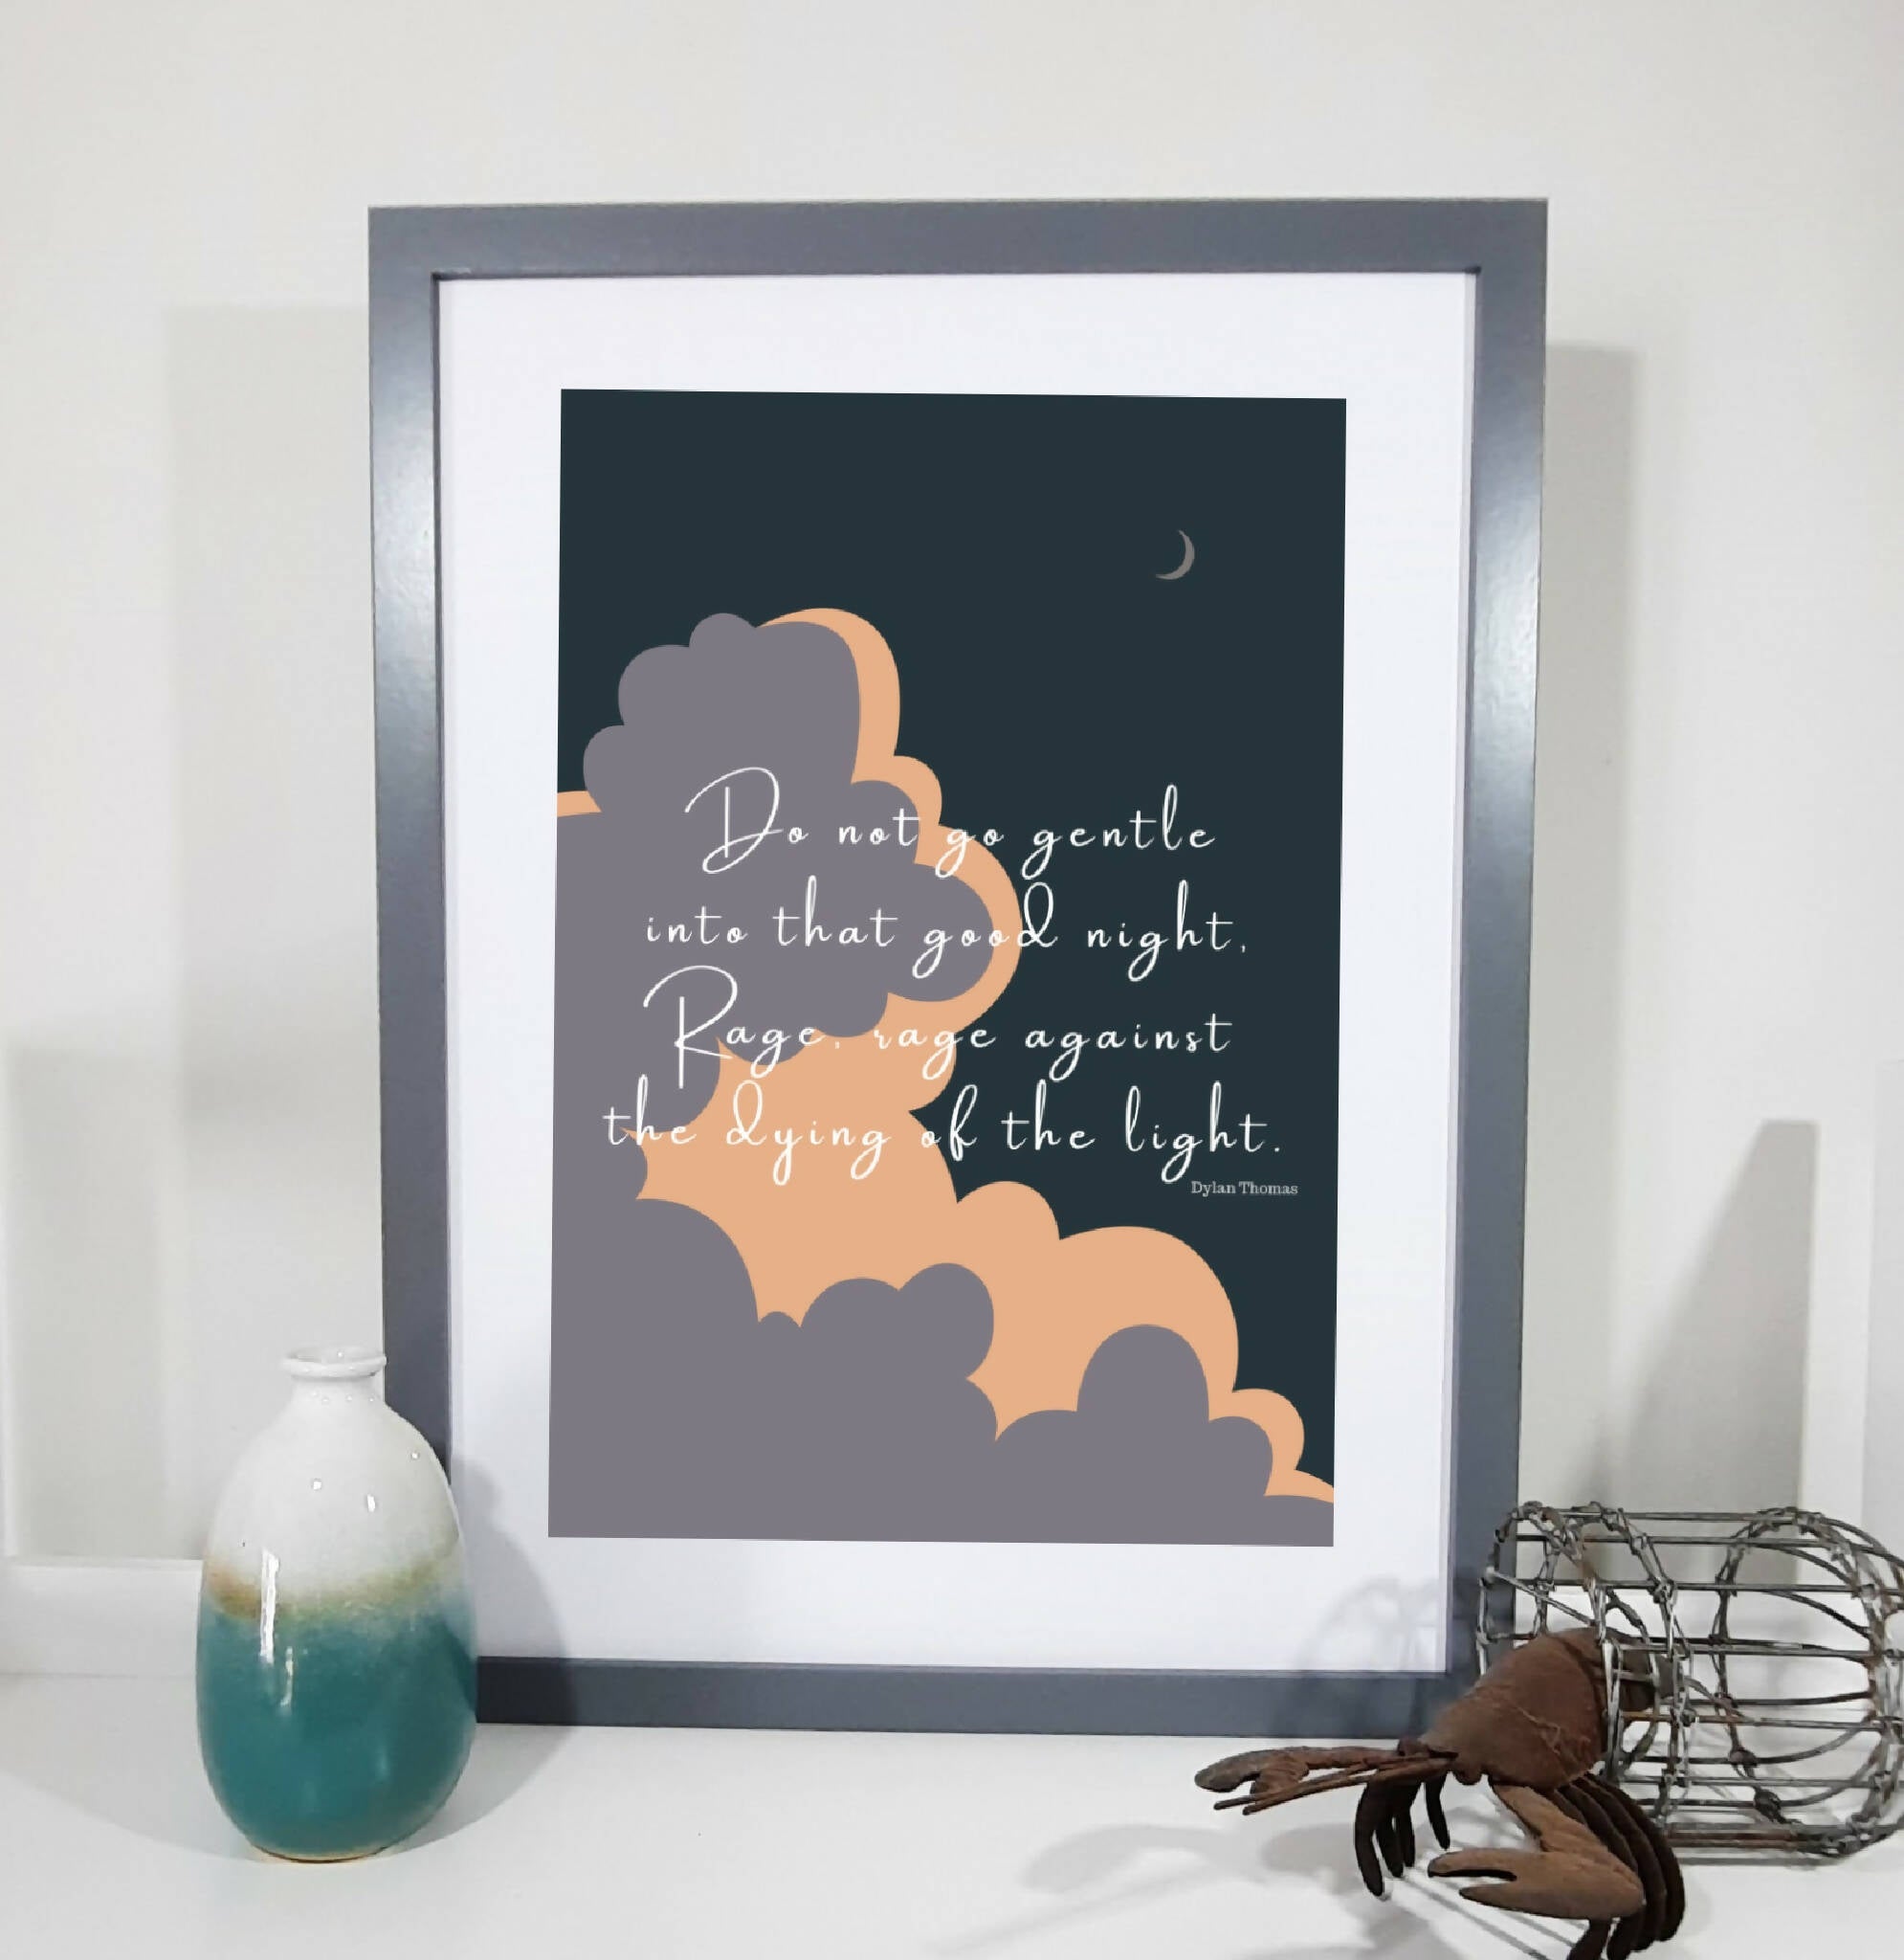 Dylan Thomas 'Do not go gentle into that good night' Welsh print, Dylan Thomas print, Welsh Wall art, Welsh poster, Welsh poetry, Digital Art